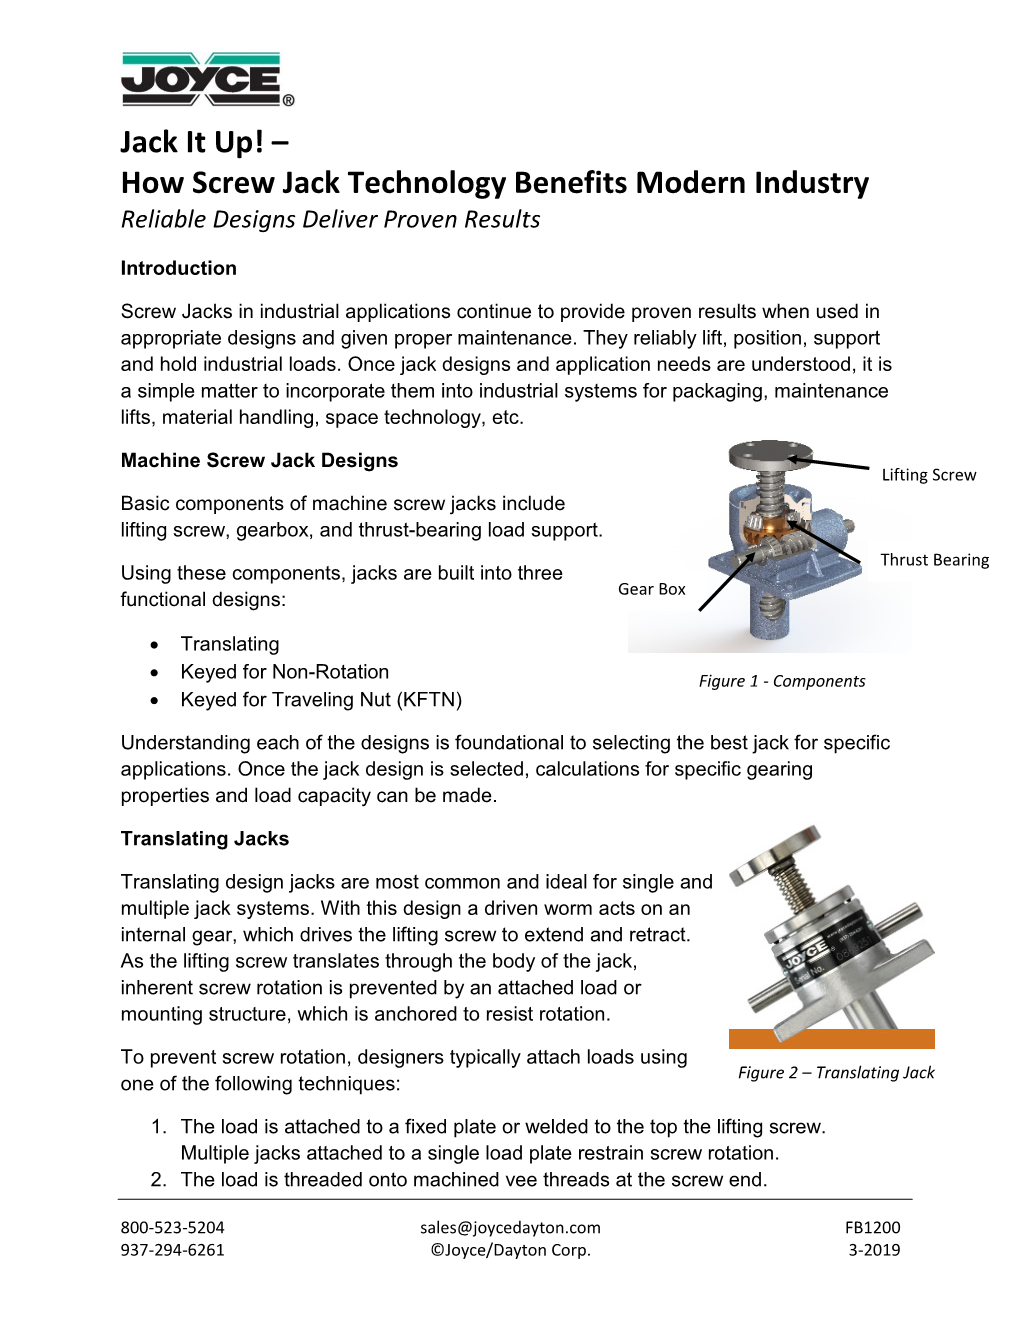 How Screw Jack Technology Benefits Modern Industry Reliable Designs Deliver Proven Results